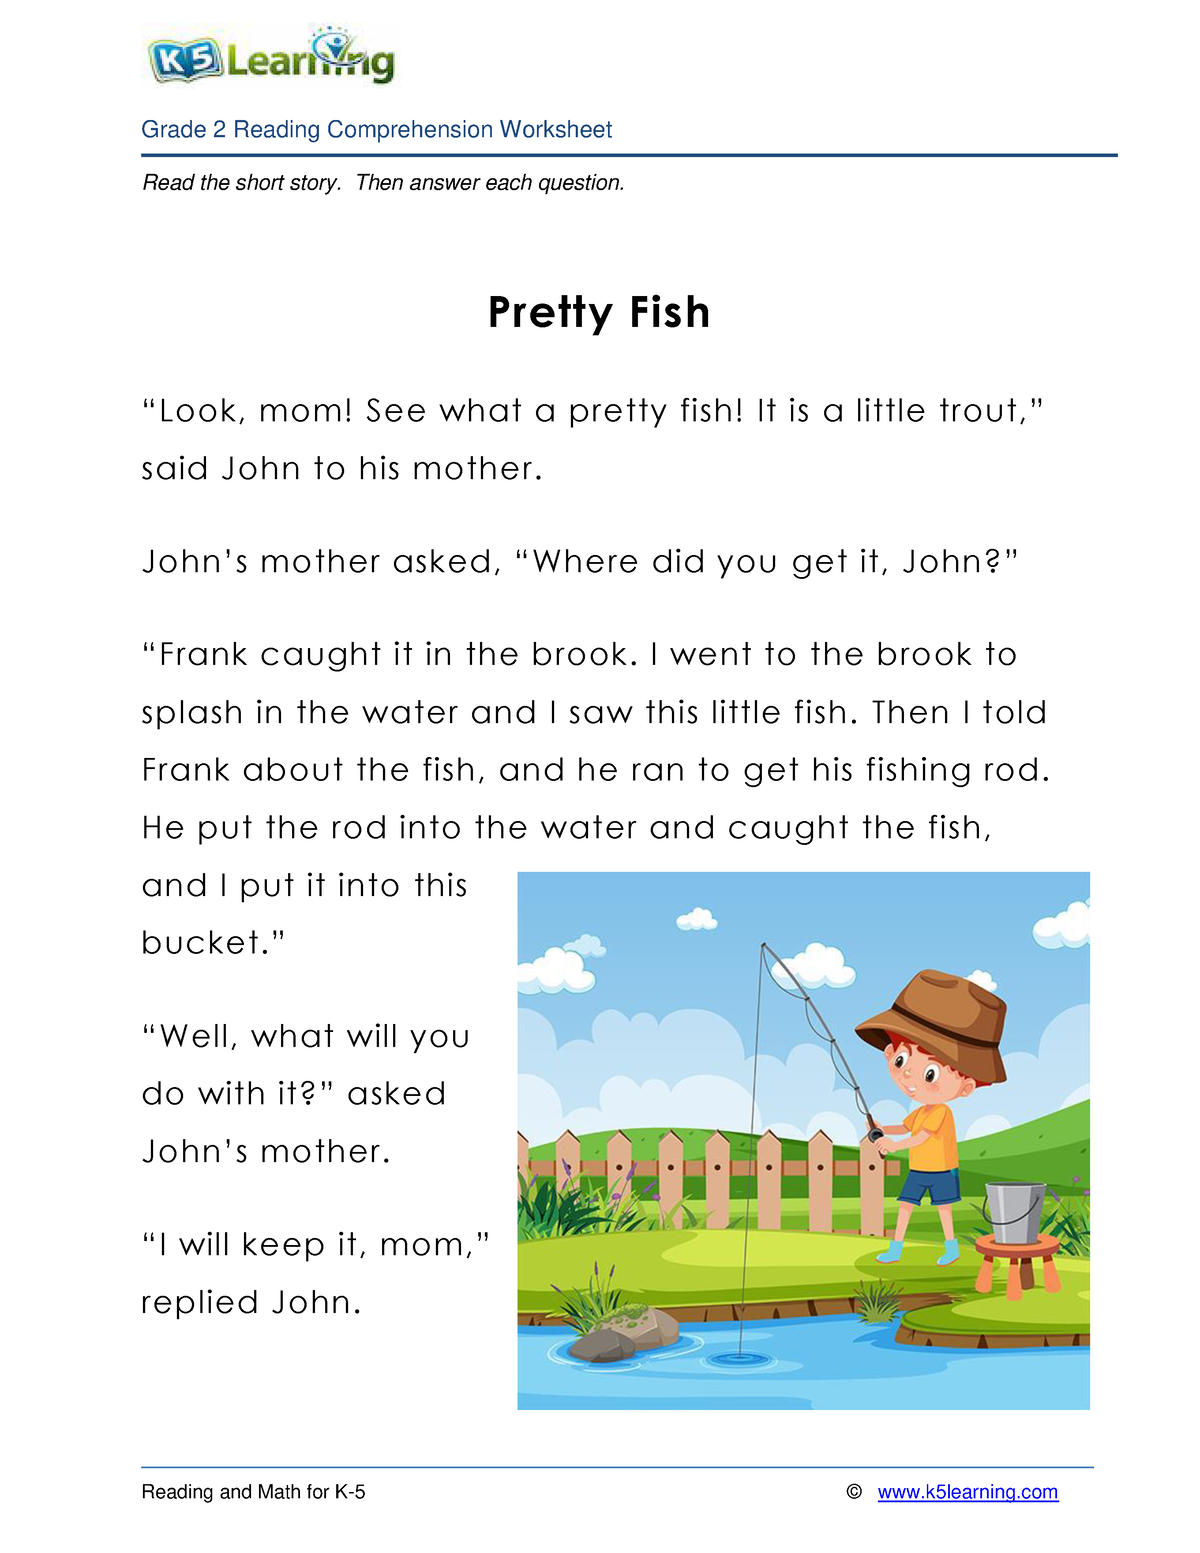 Grade 2 Story Fish Read The Short Story Then Answer Each Question